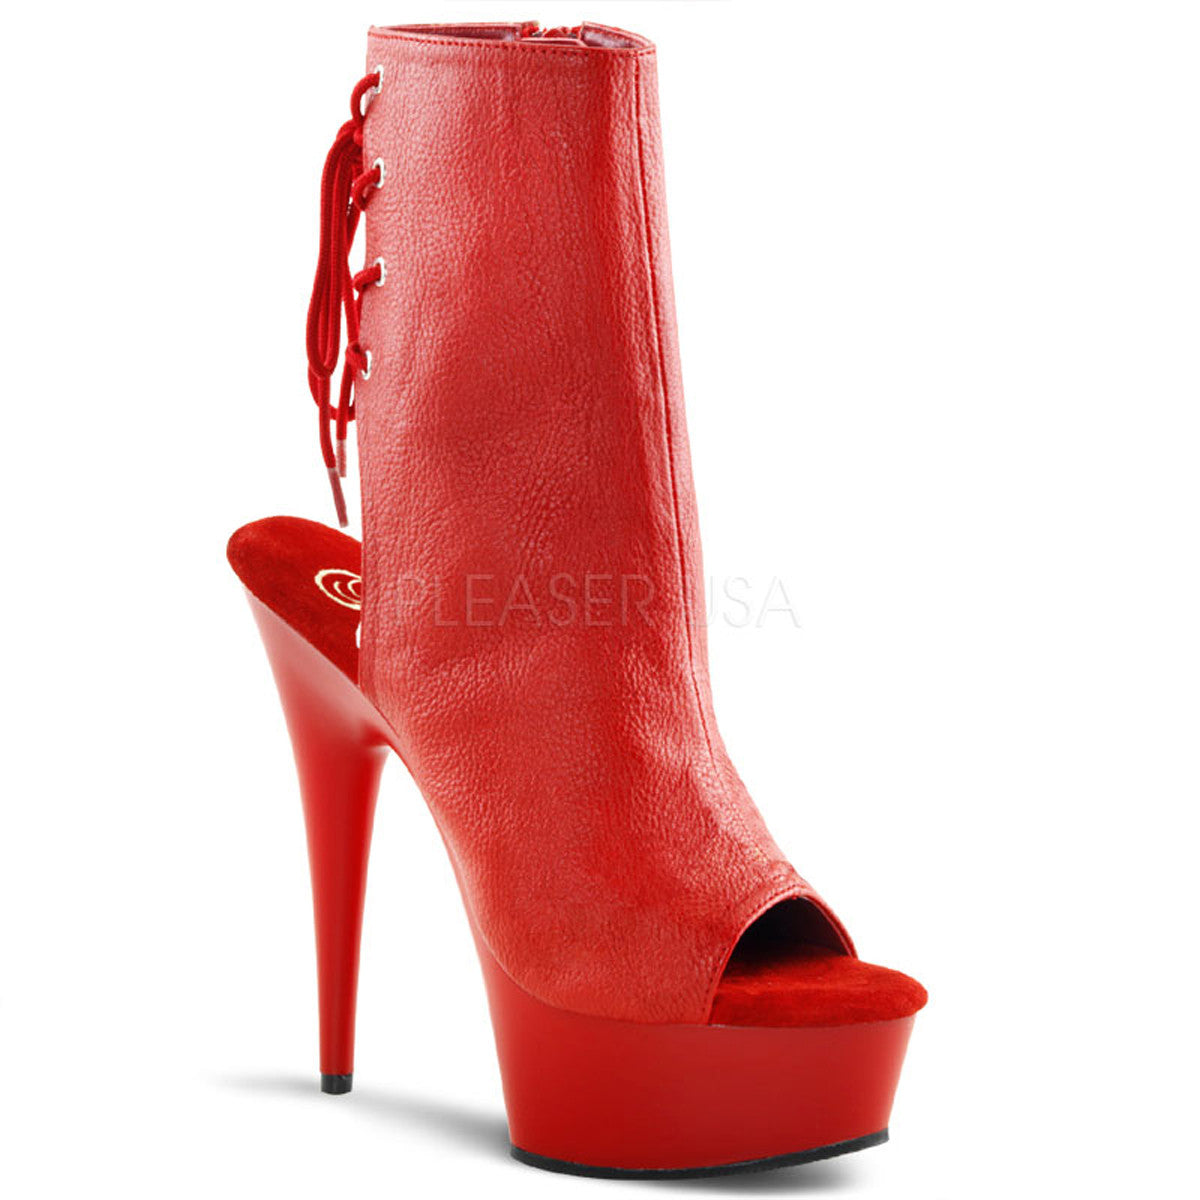 PLEASER DELIGHT-1018 Red Pu-Red Ankle Boots - Shoecup.com